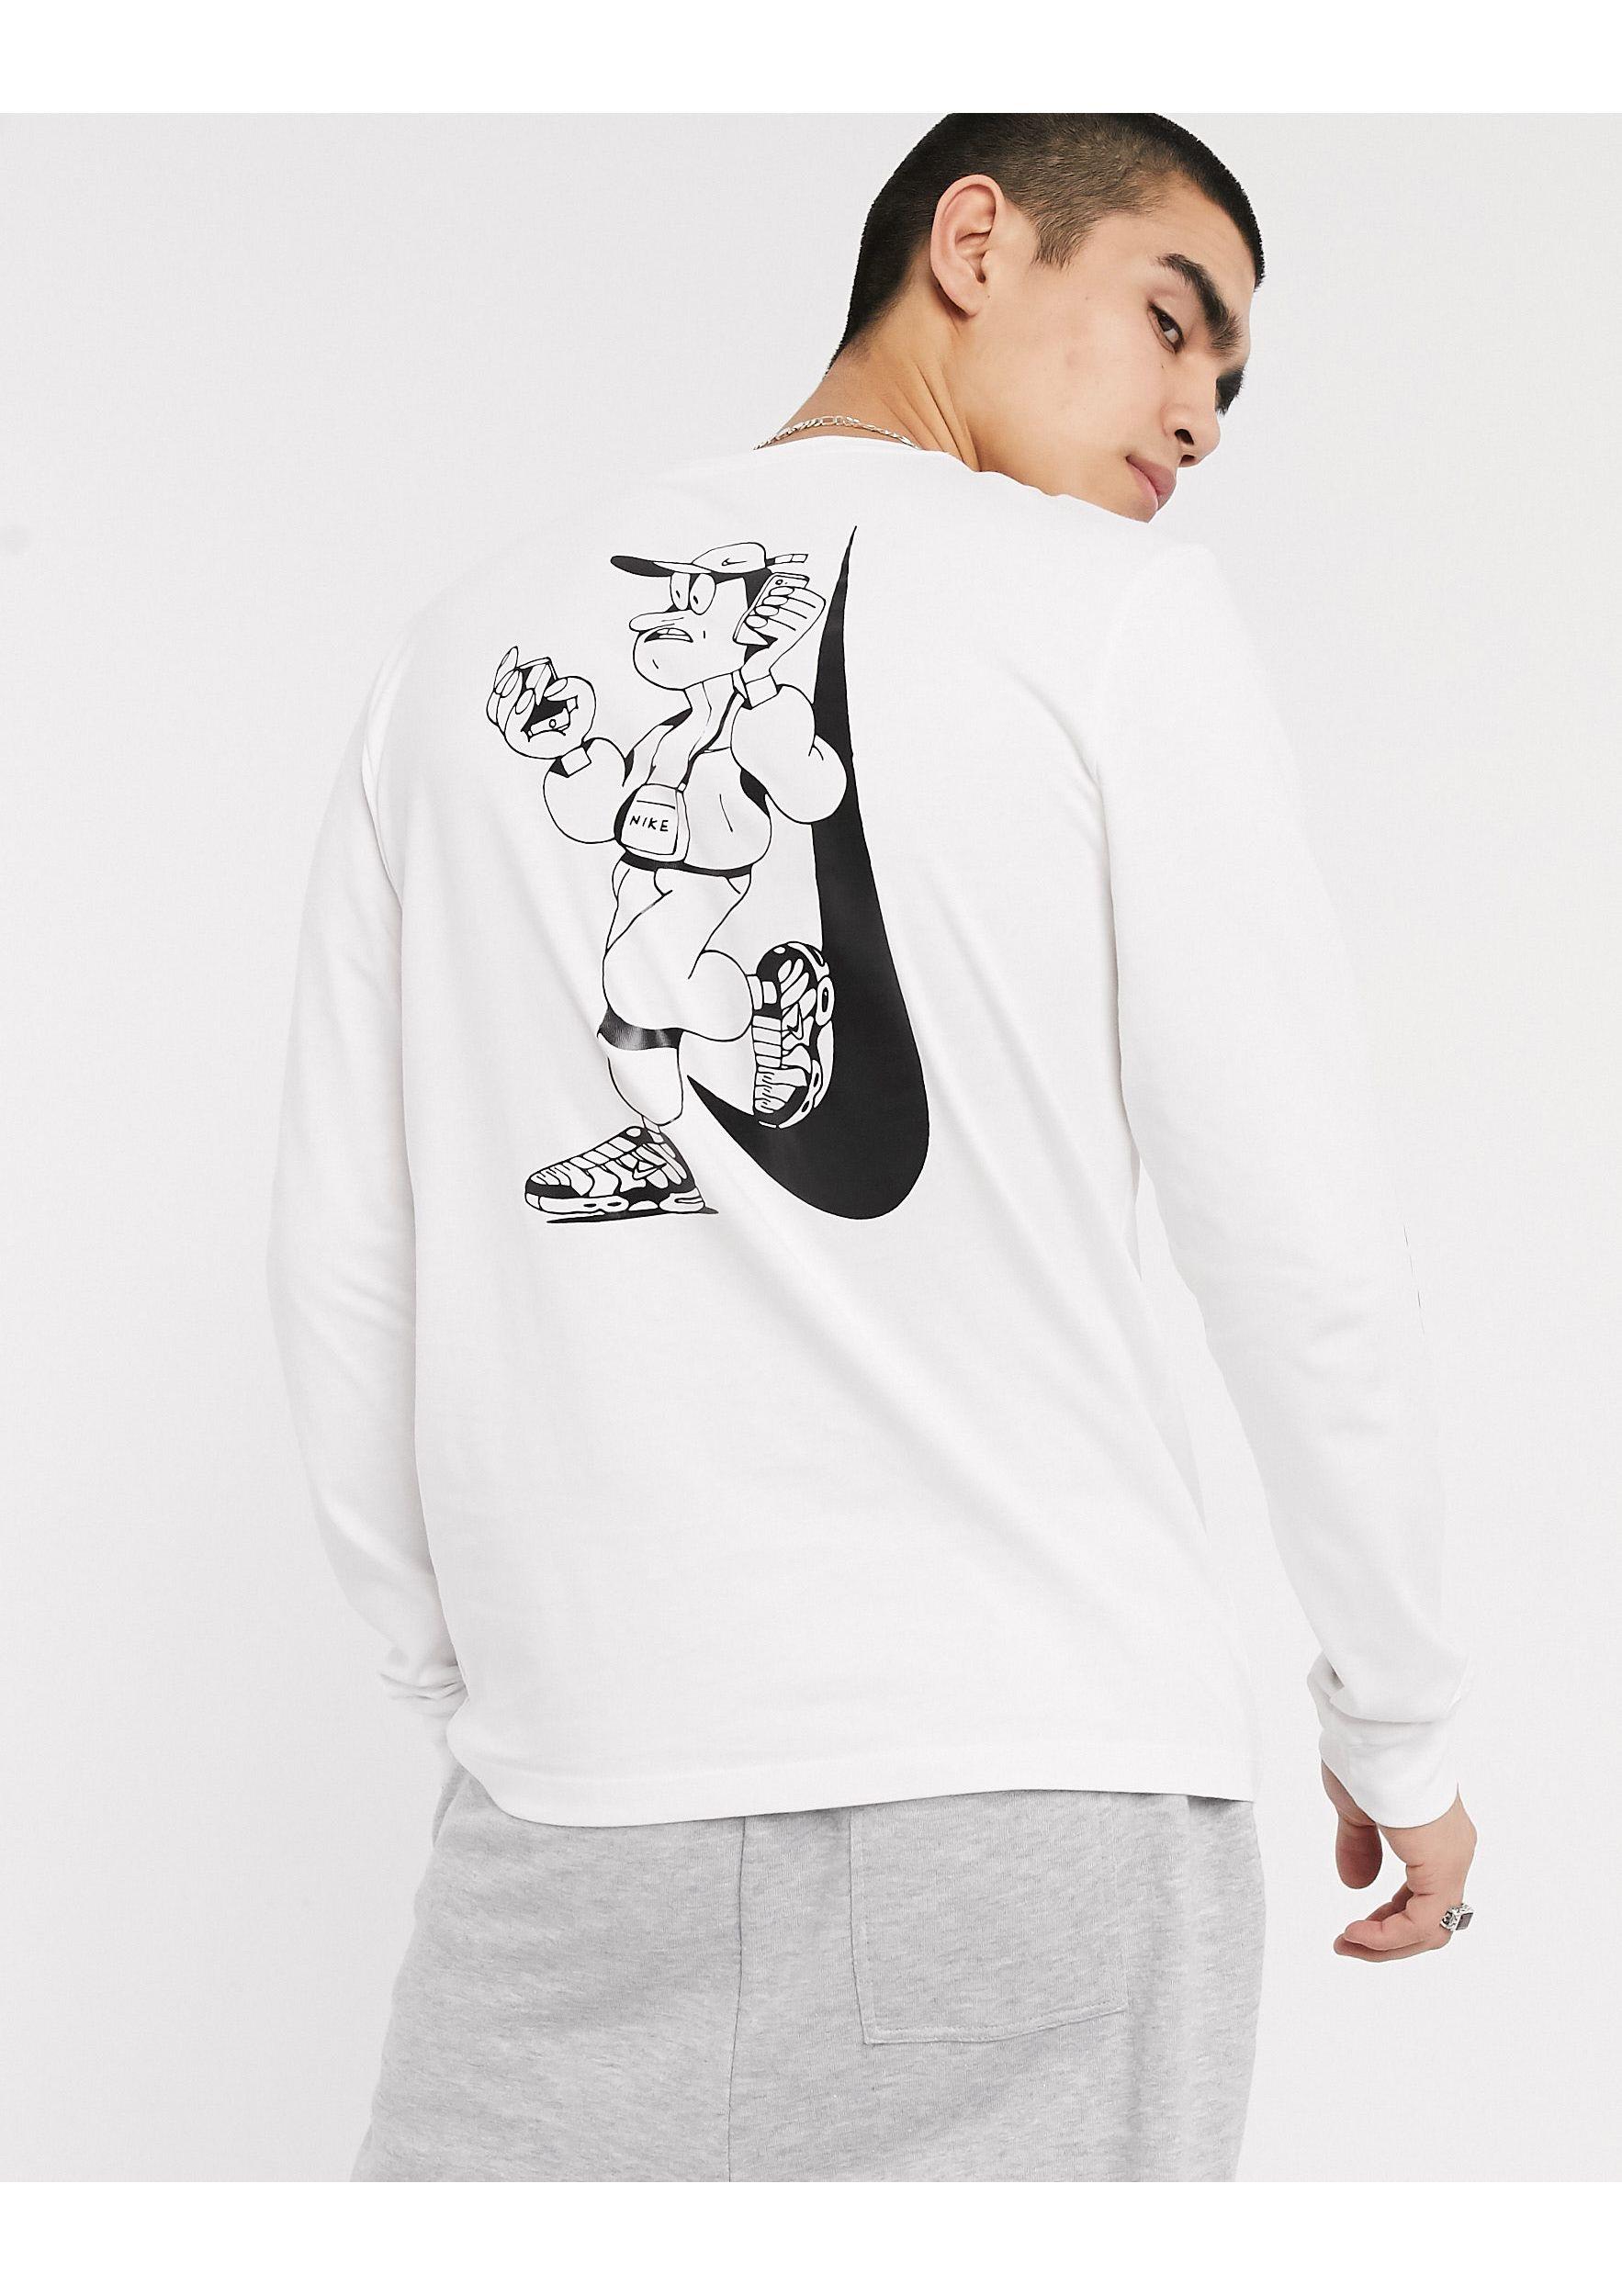 Nike Cotton Lugosis Artist Pack Long Sleeve T-shirt in White for Men | Lyst